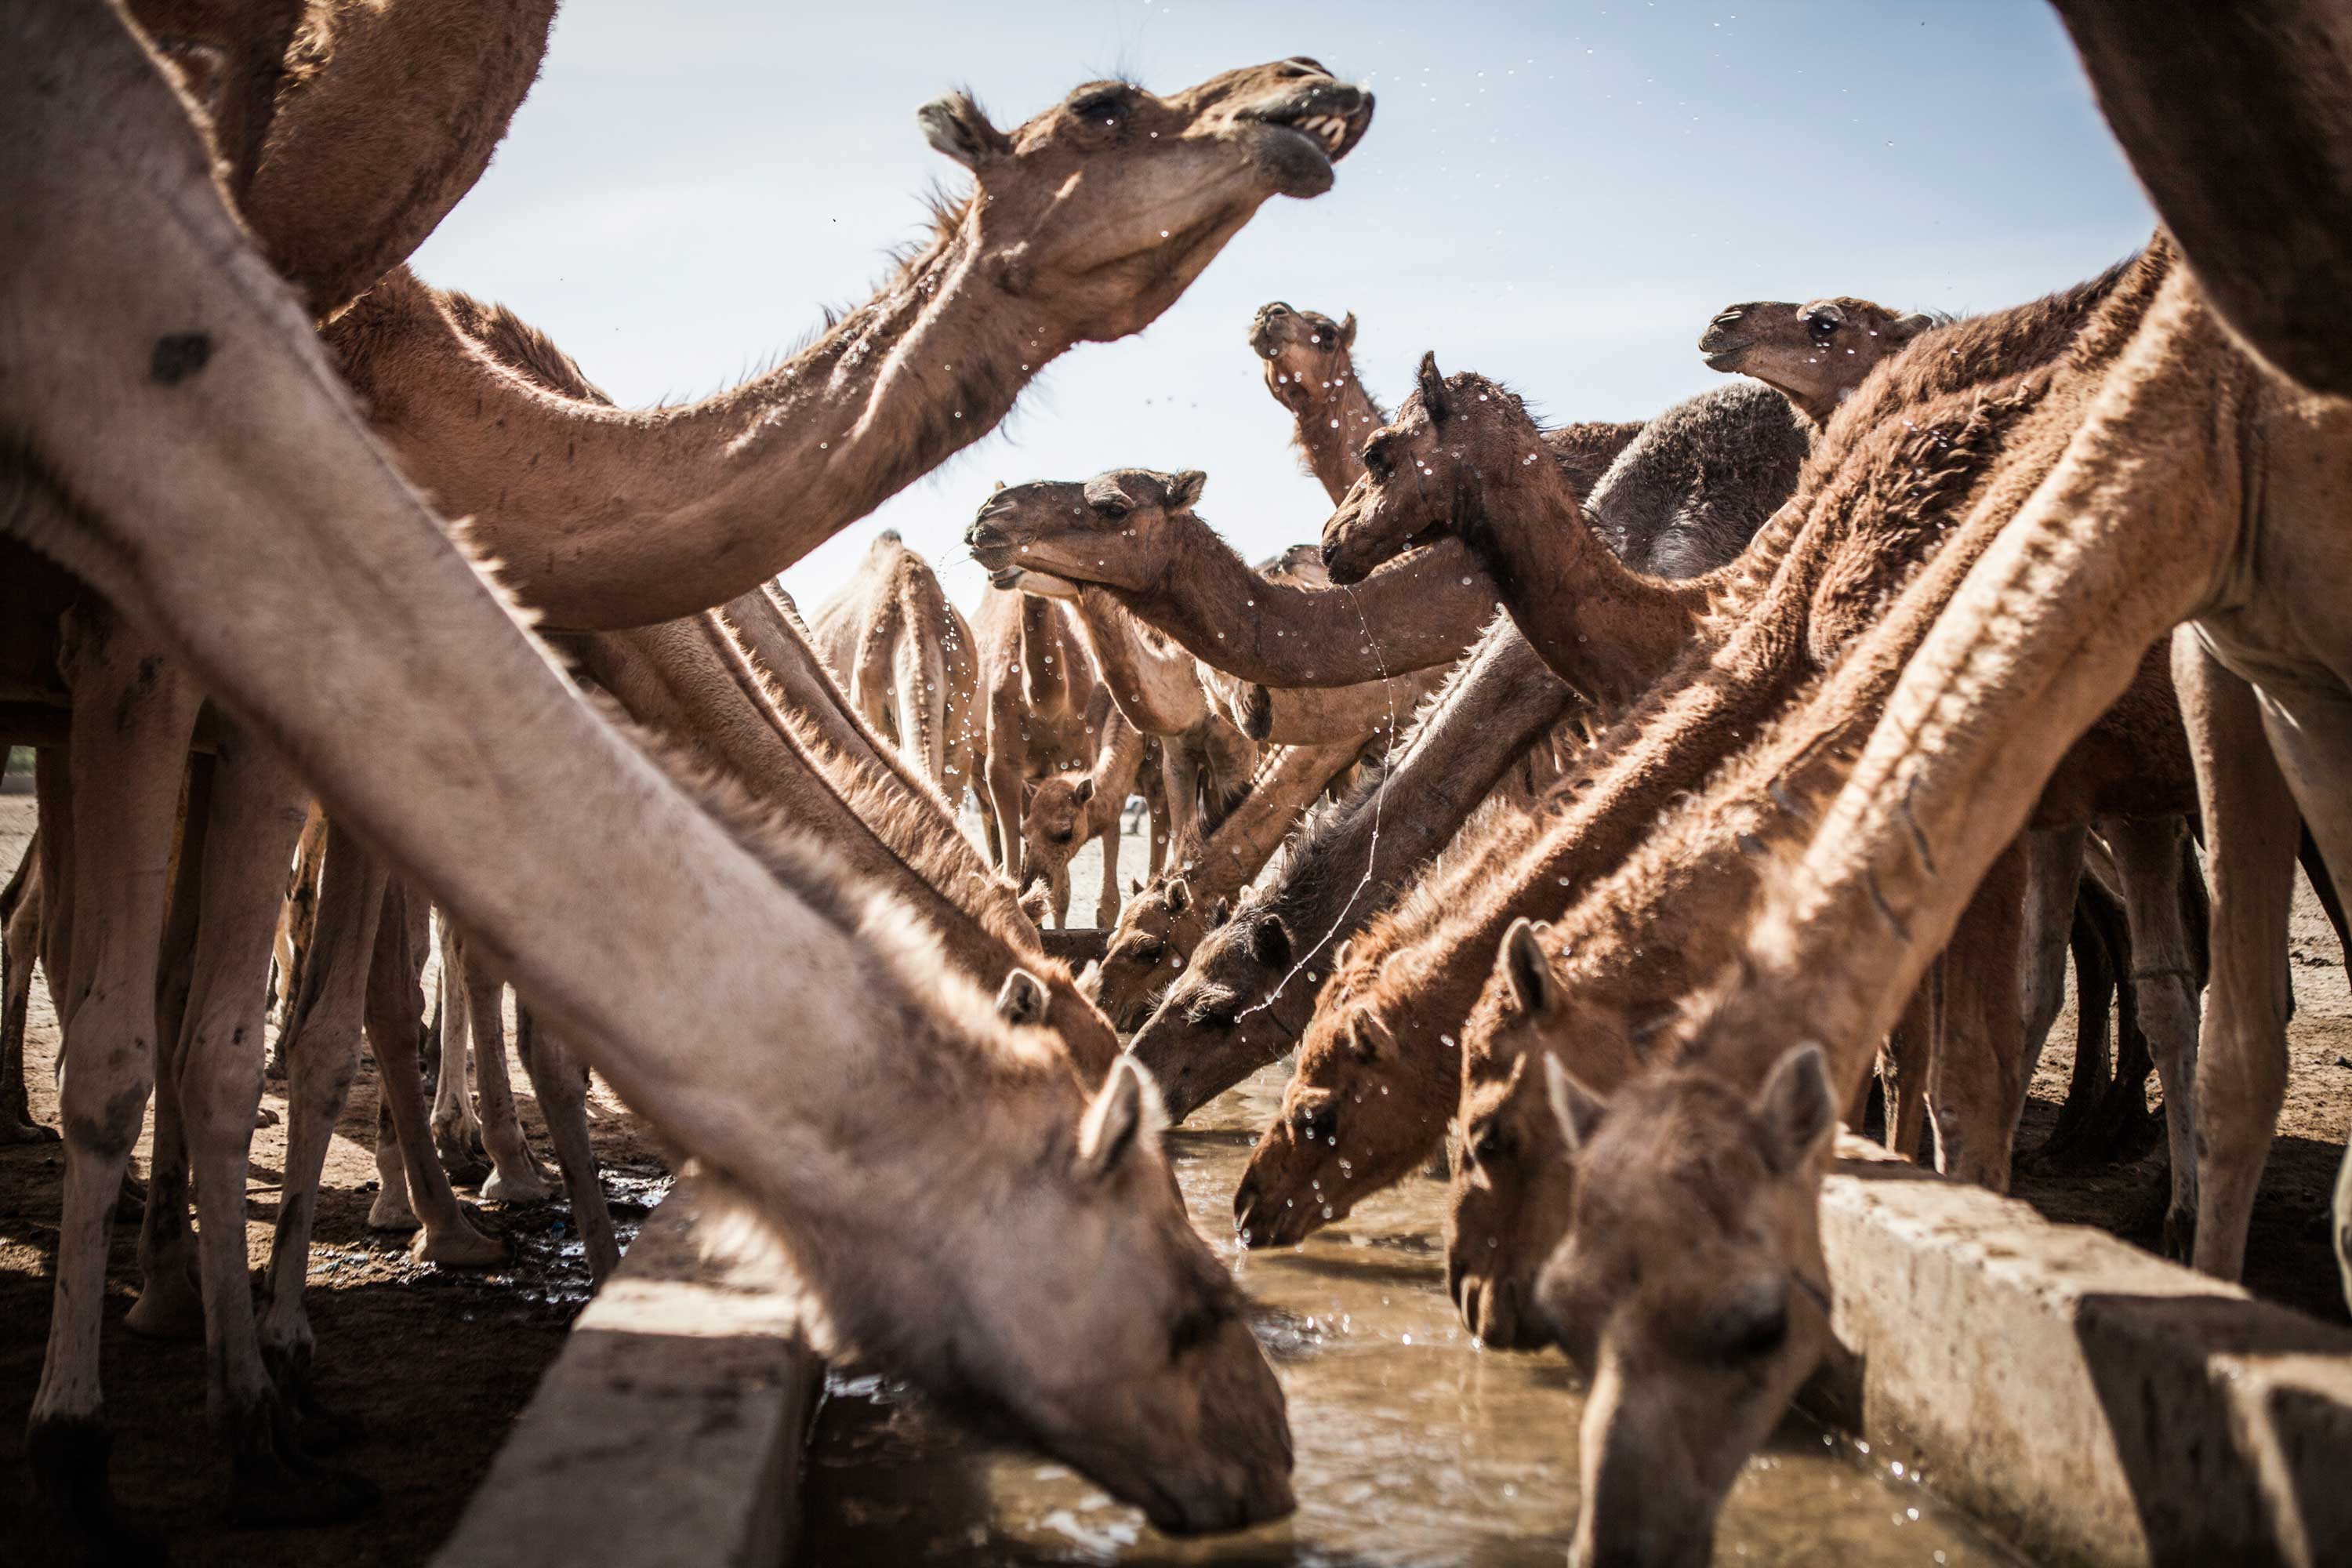 Camels drink water from a trough in Kindjandi Camp in Diffa, Niger.